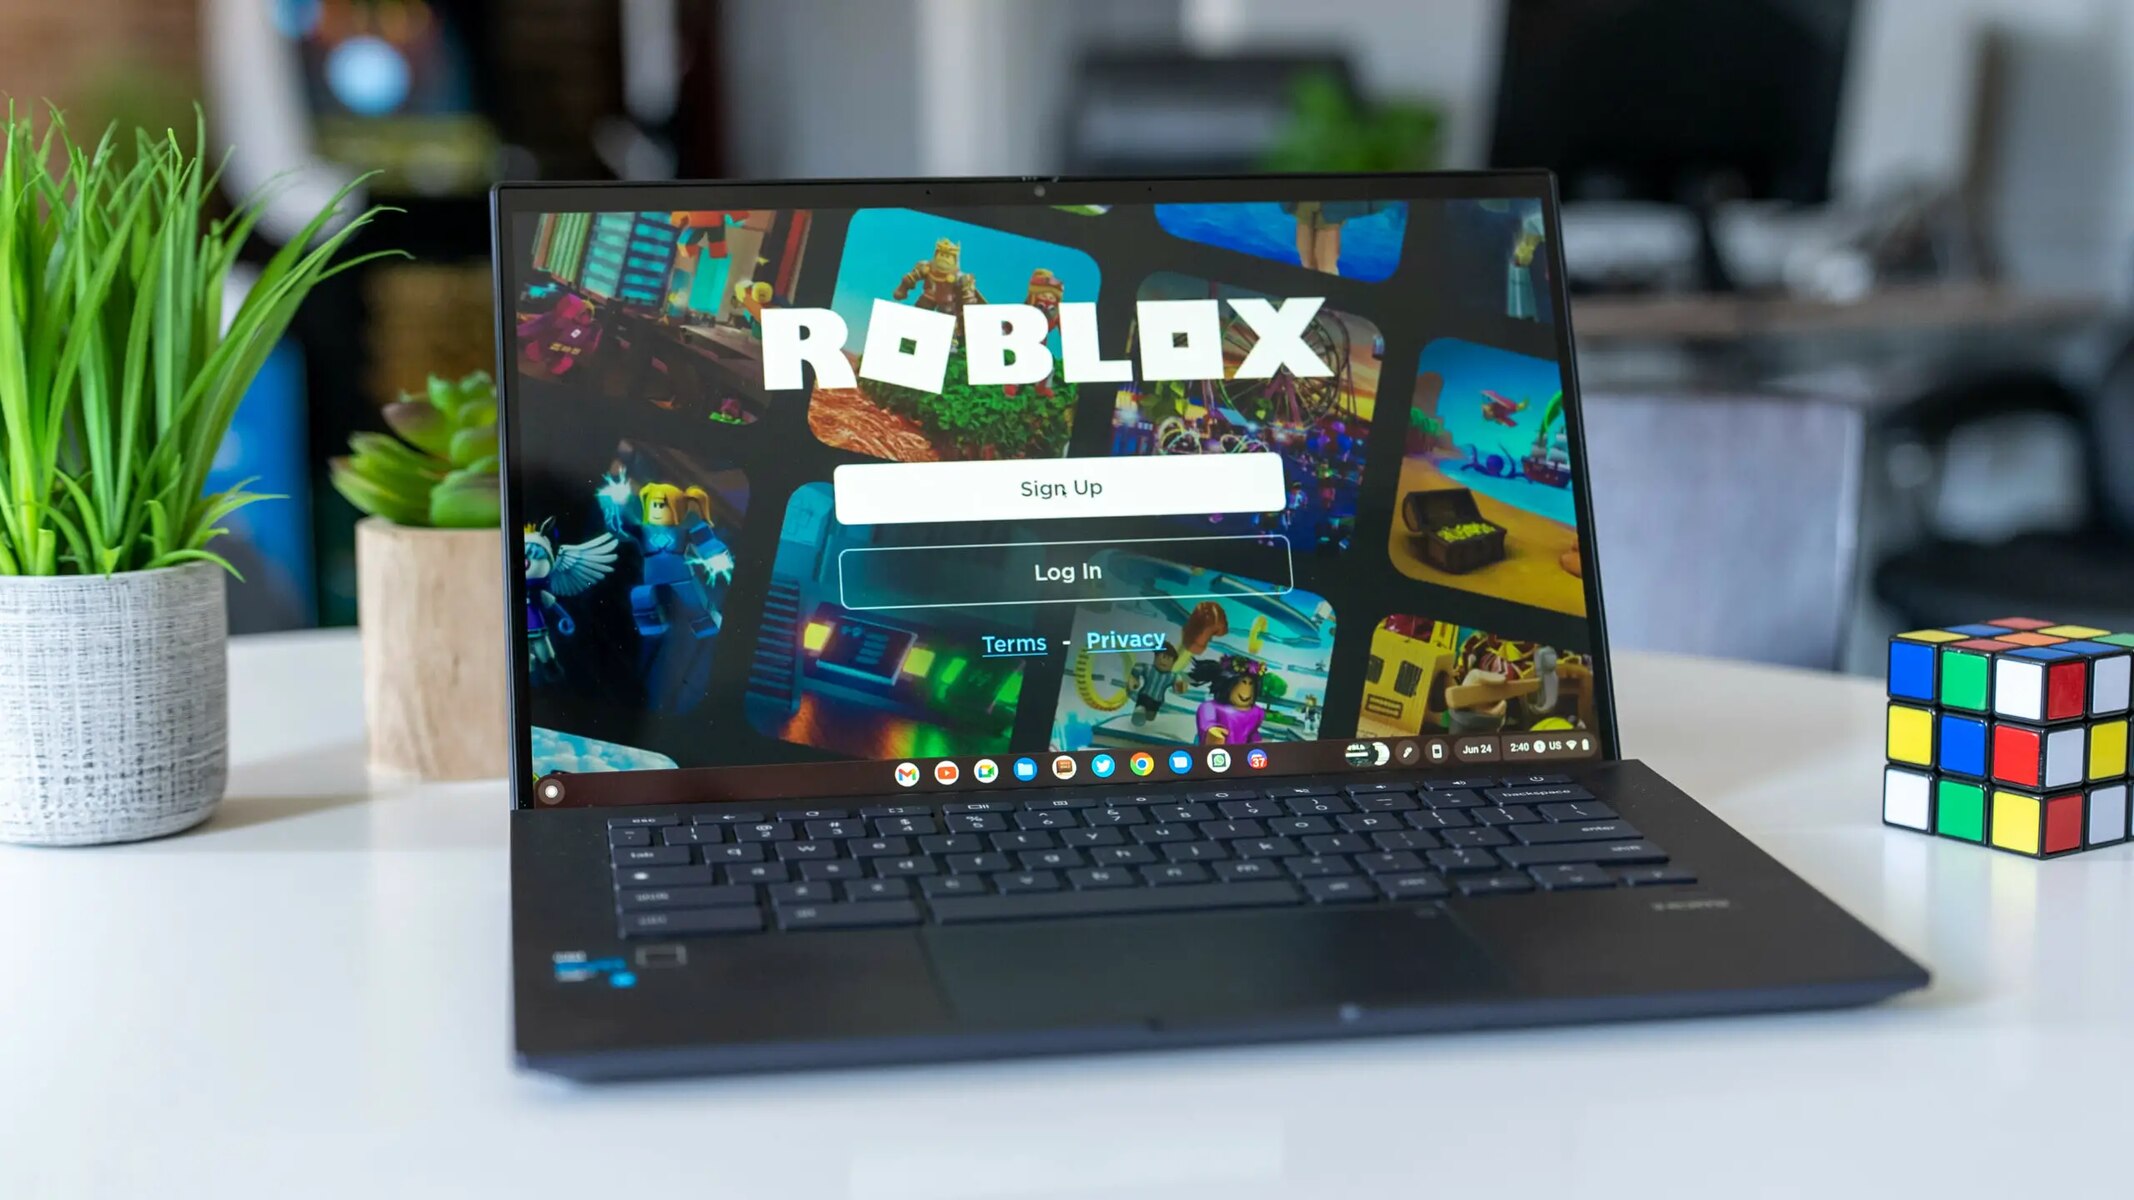 How To Play Roblox On Browser On Chromebook